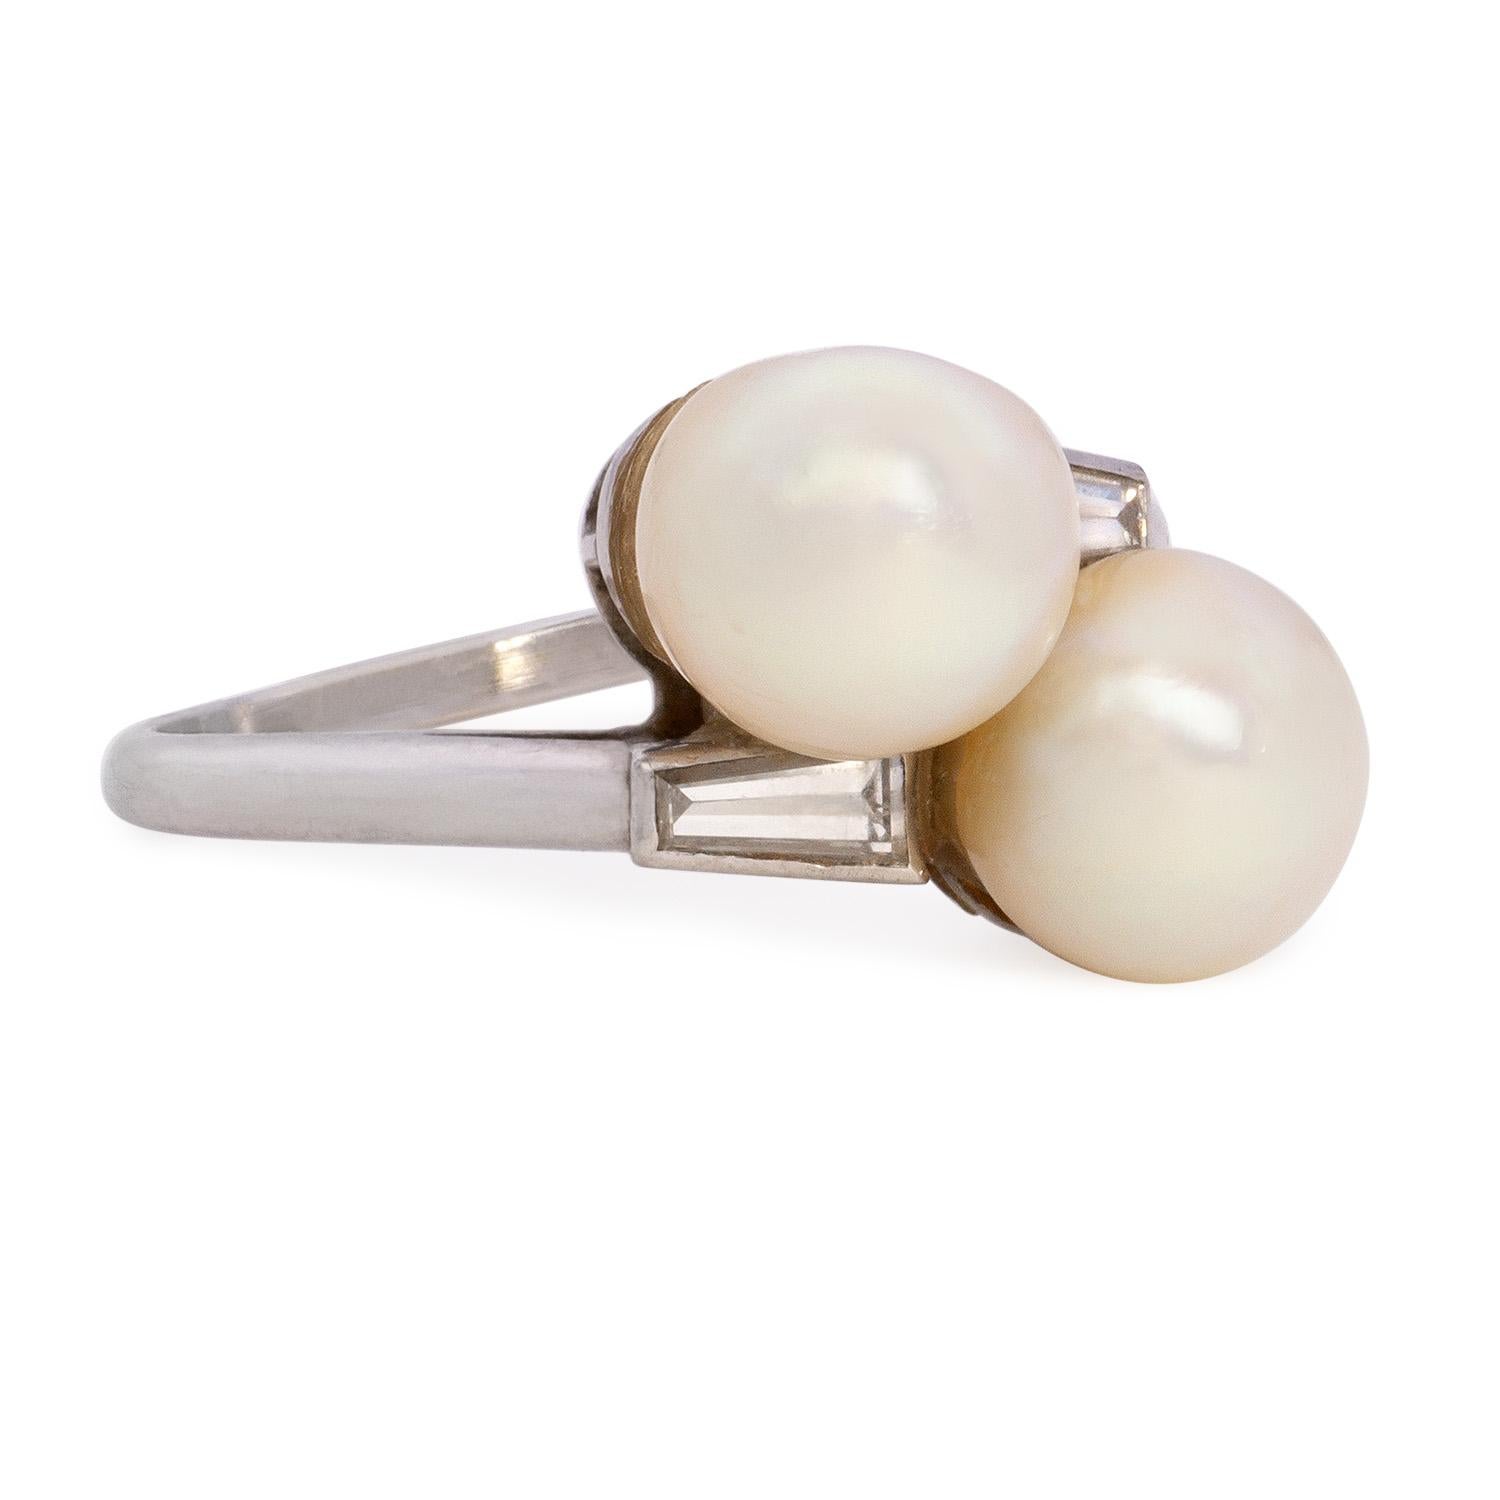 Introducing our exquisite Elegant Toi et Moi Ring, a sophisticated blend of timeless elegance and modern allure. Crafted in platinum, this ring features two stunning fine white pearls and two calibrated baguette diamonds, all delicately set in a